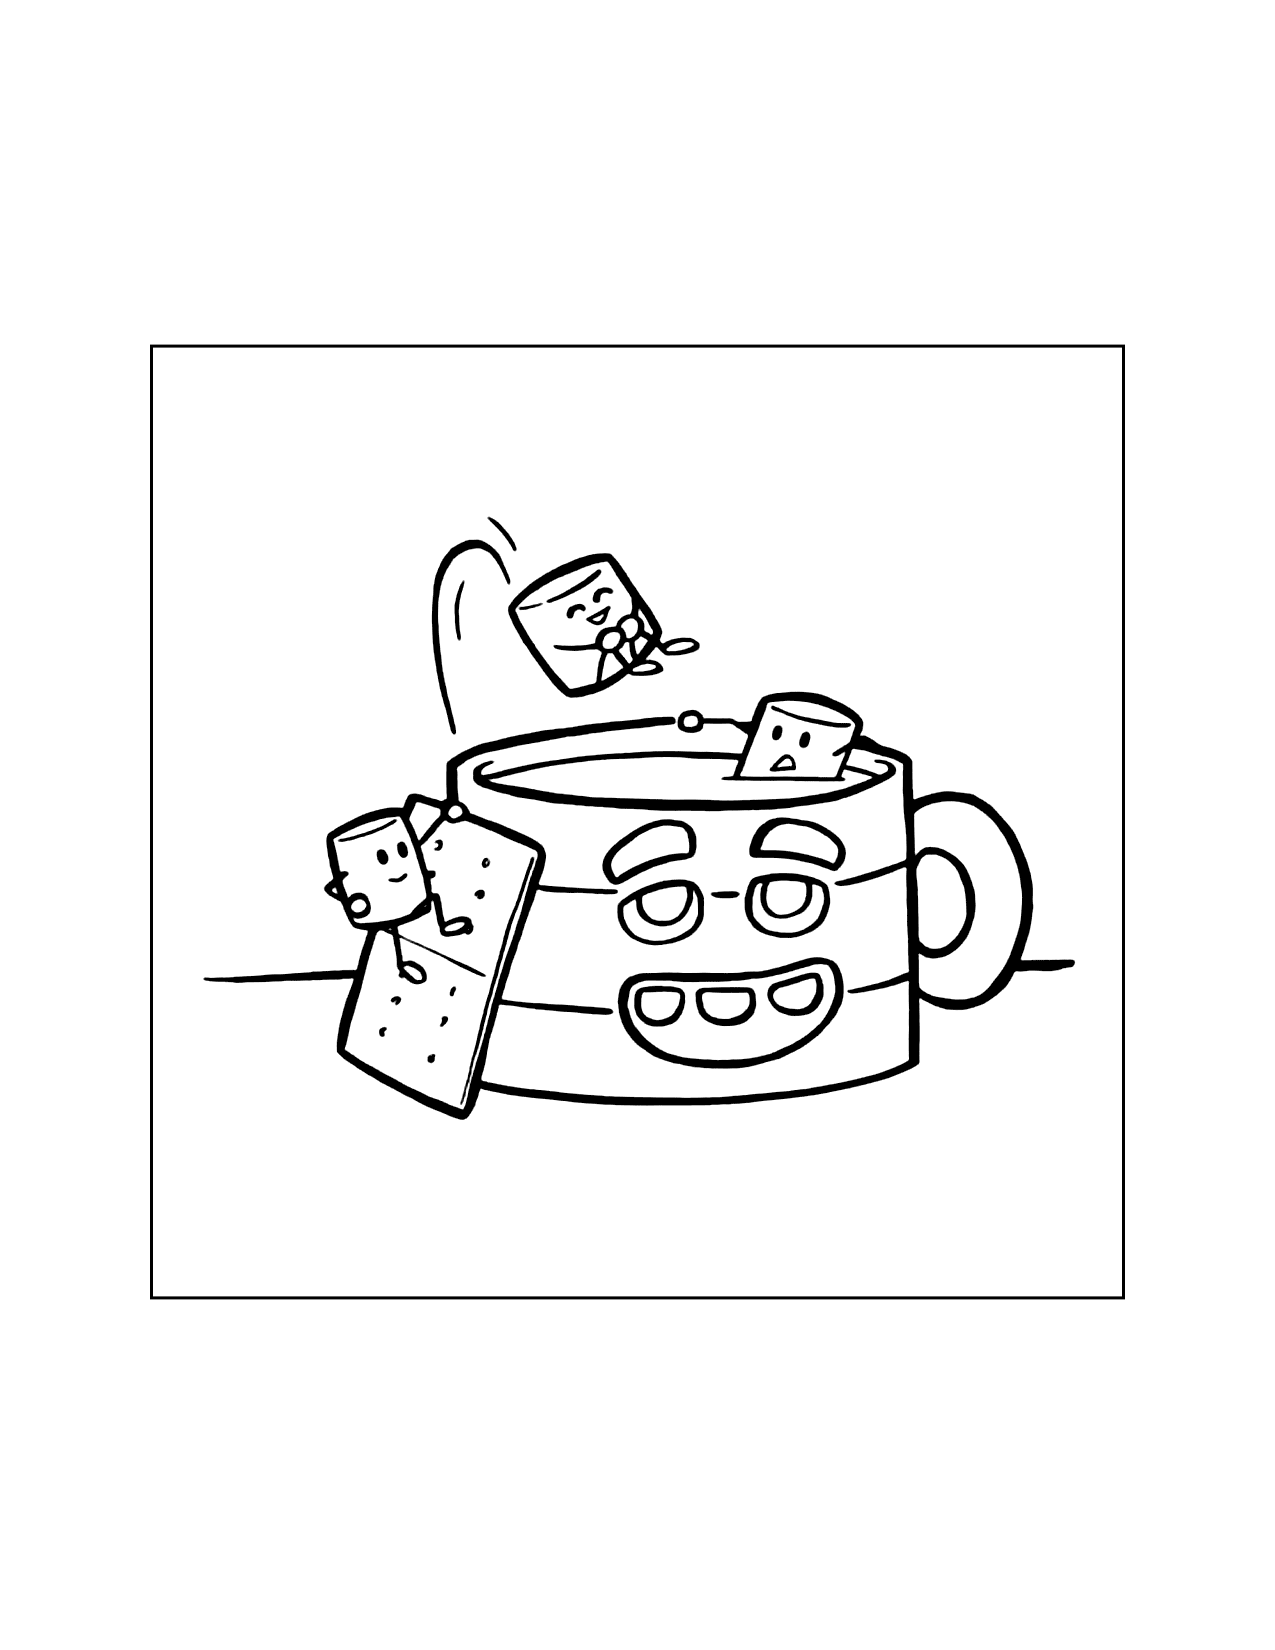 Marshmallows In Hot Chocolate Coloring Page